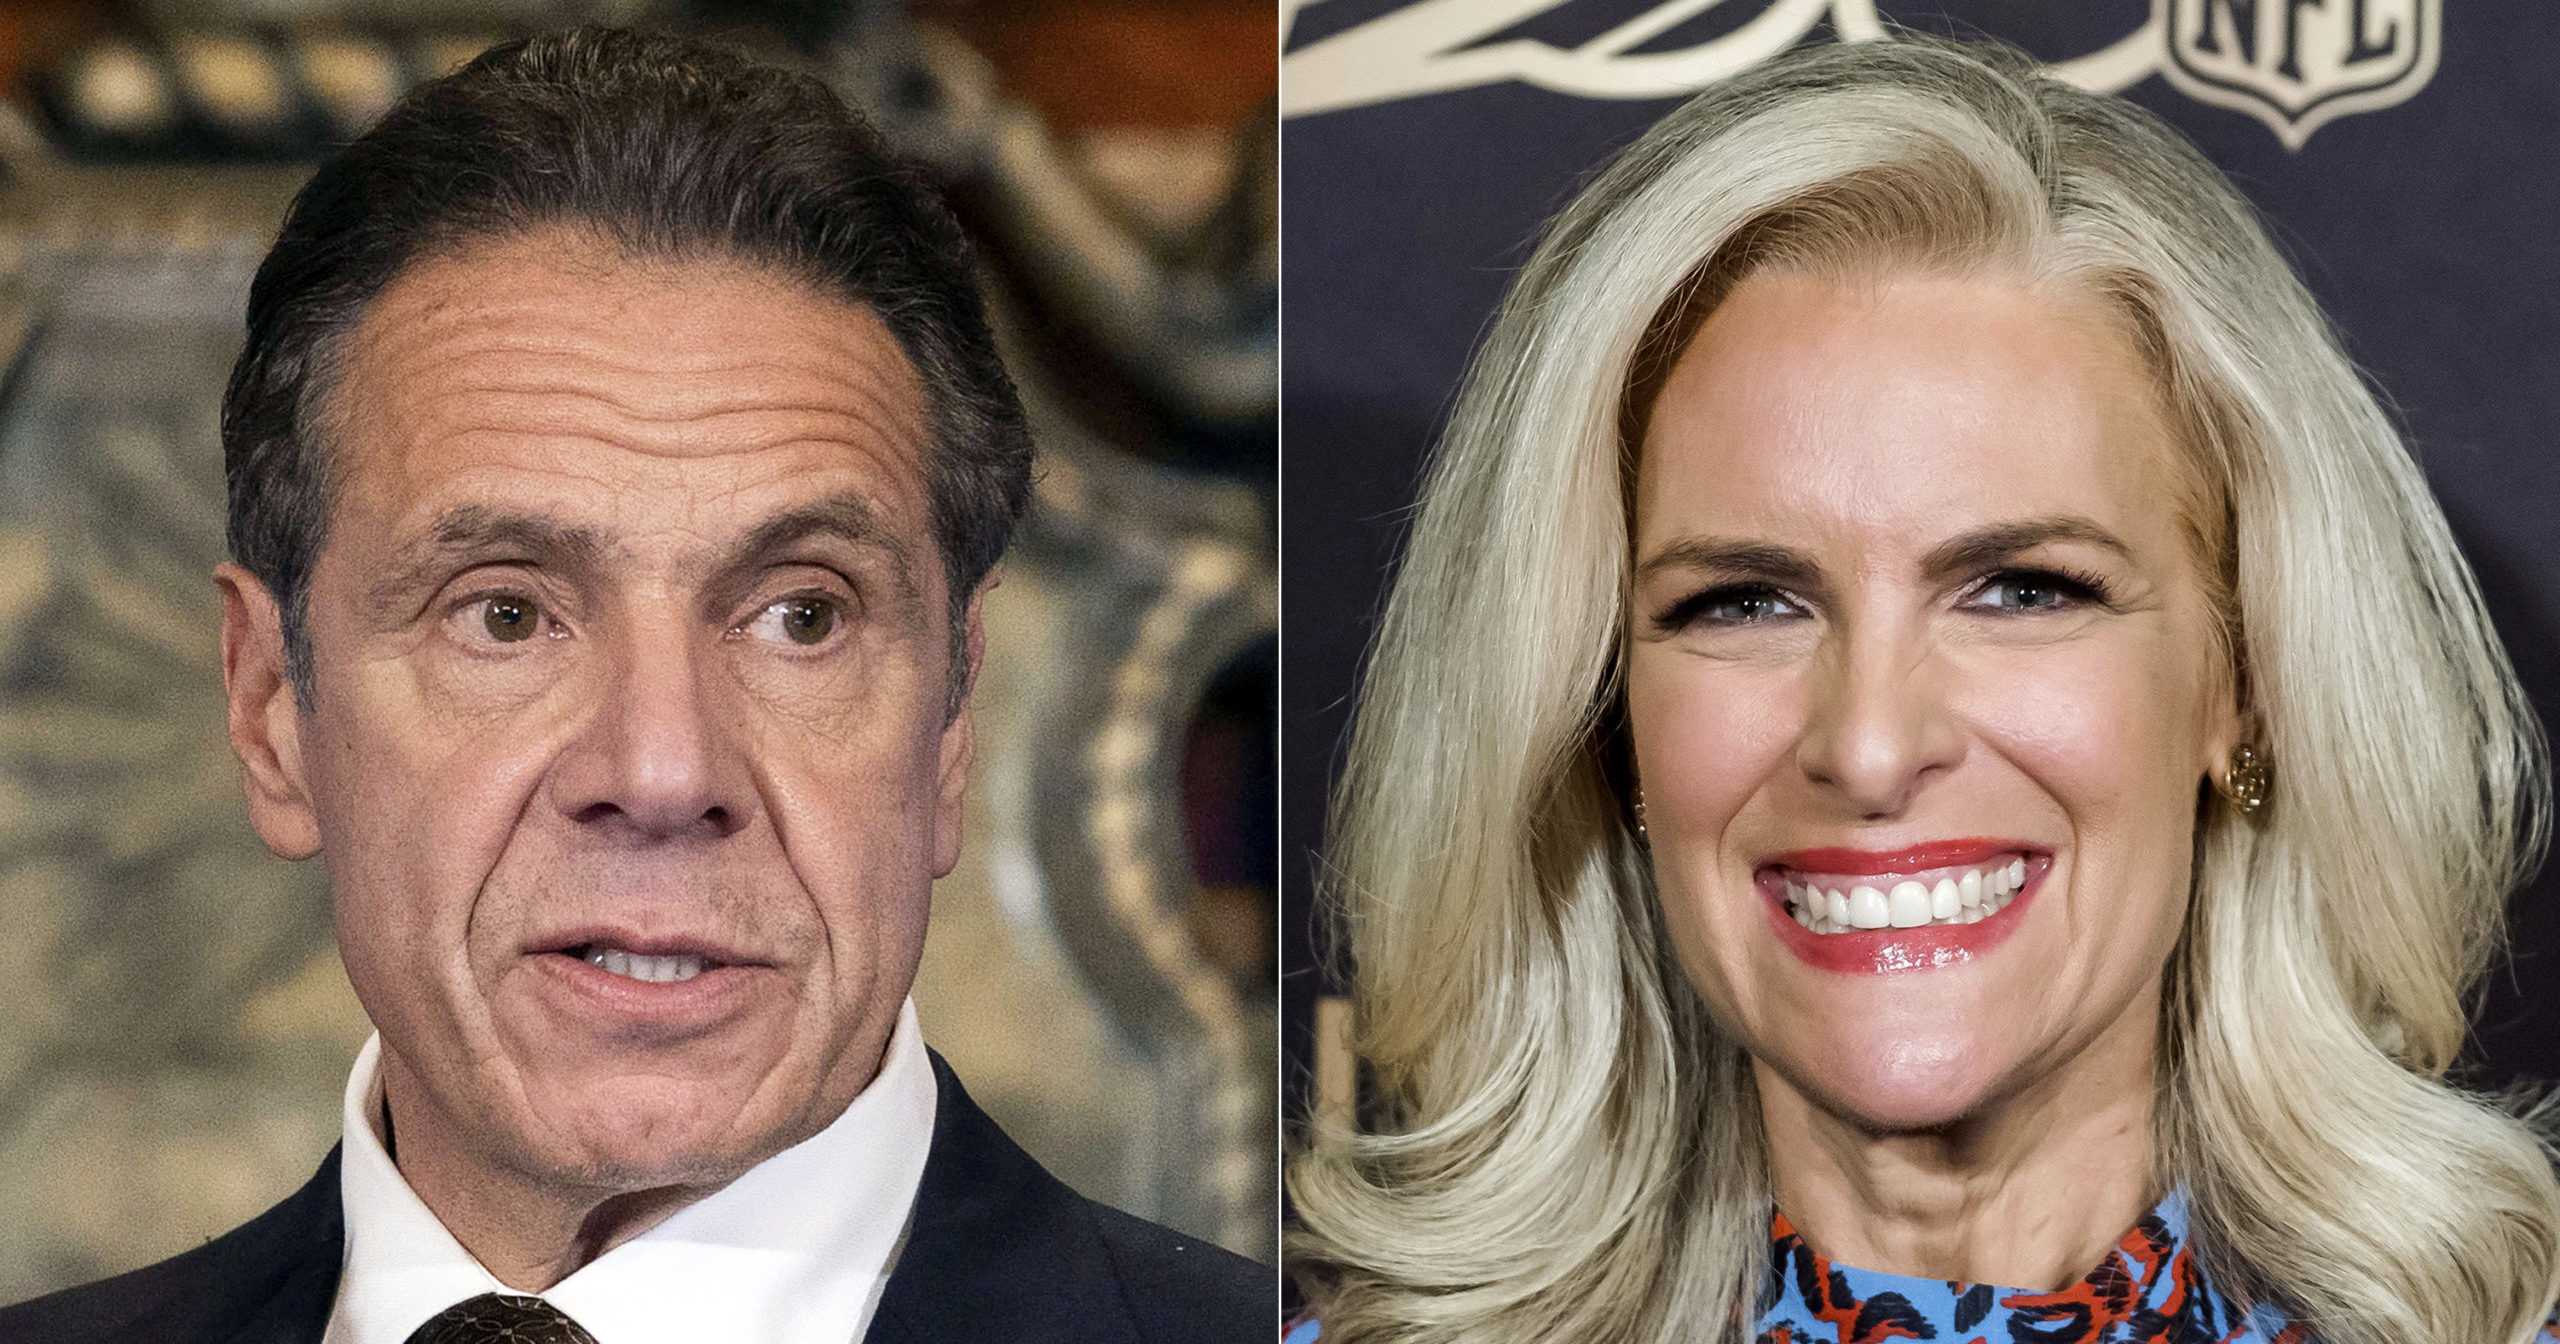 New York Gov. Andrew M. Cuomo, left, appears during a news conference about the COVID-19 vaccine at the State Capitol in Albany, New York, on Dec. 3, 2020, left, and Fox News' Janice Dean attends a screening of "A Lifetime of Sundays" in New York on Sept. 18, 2019.